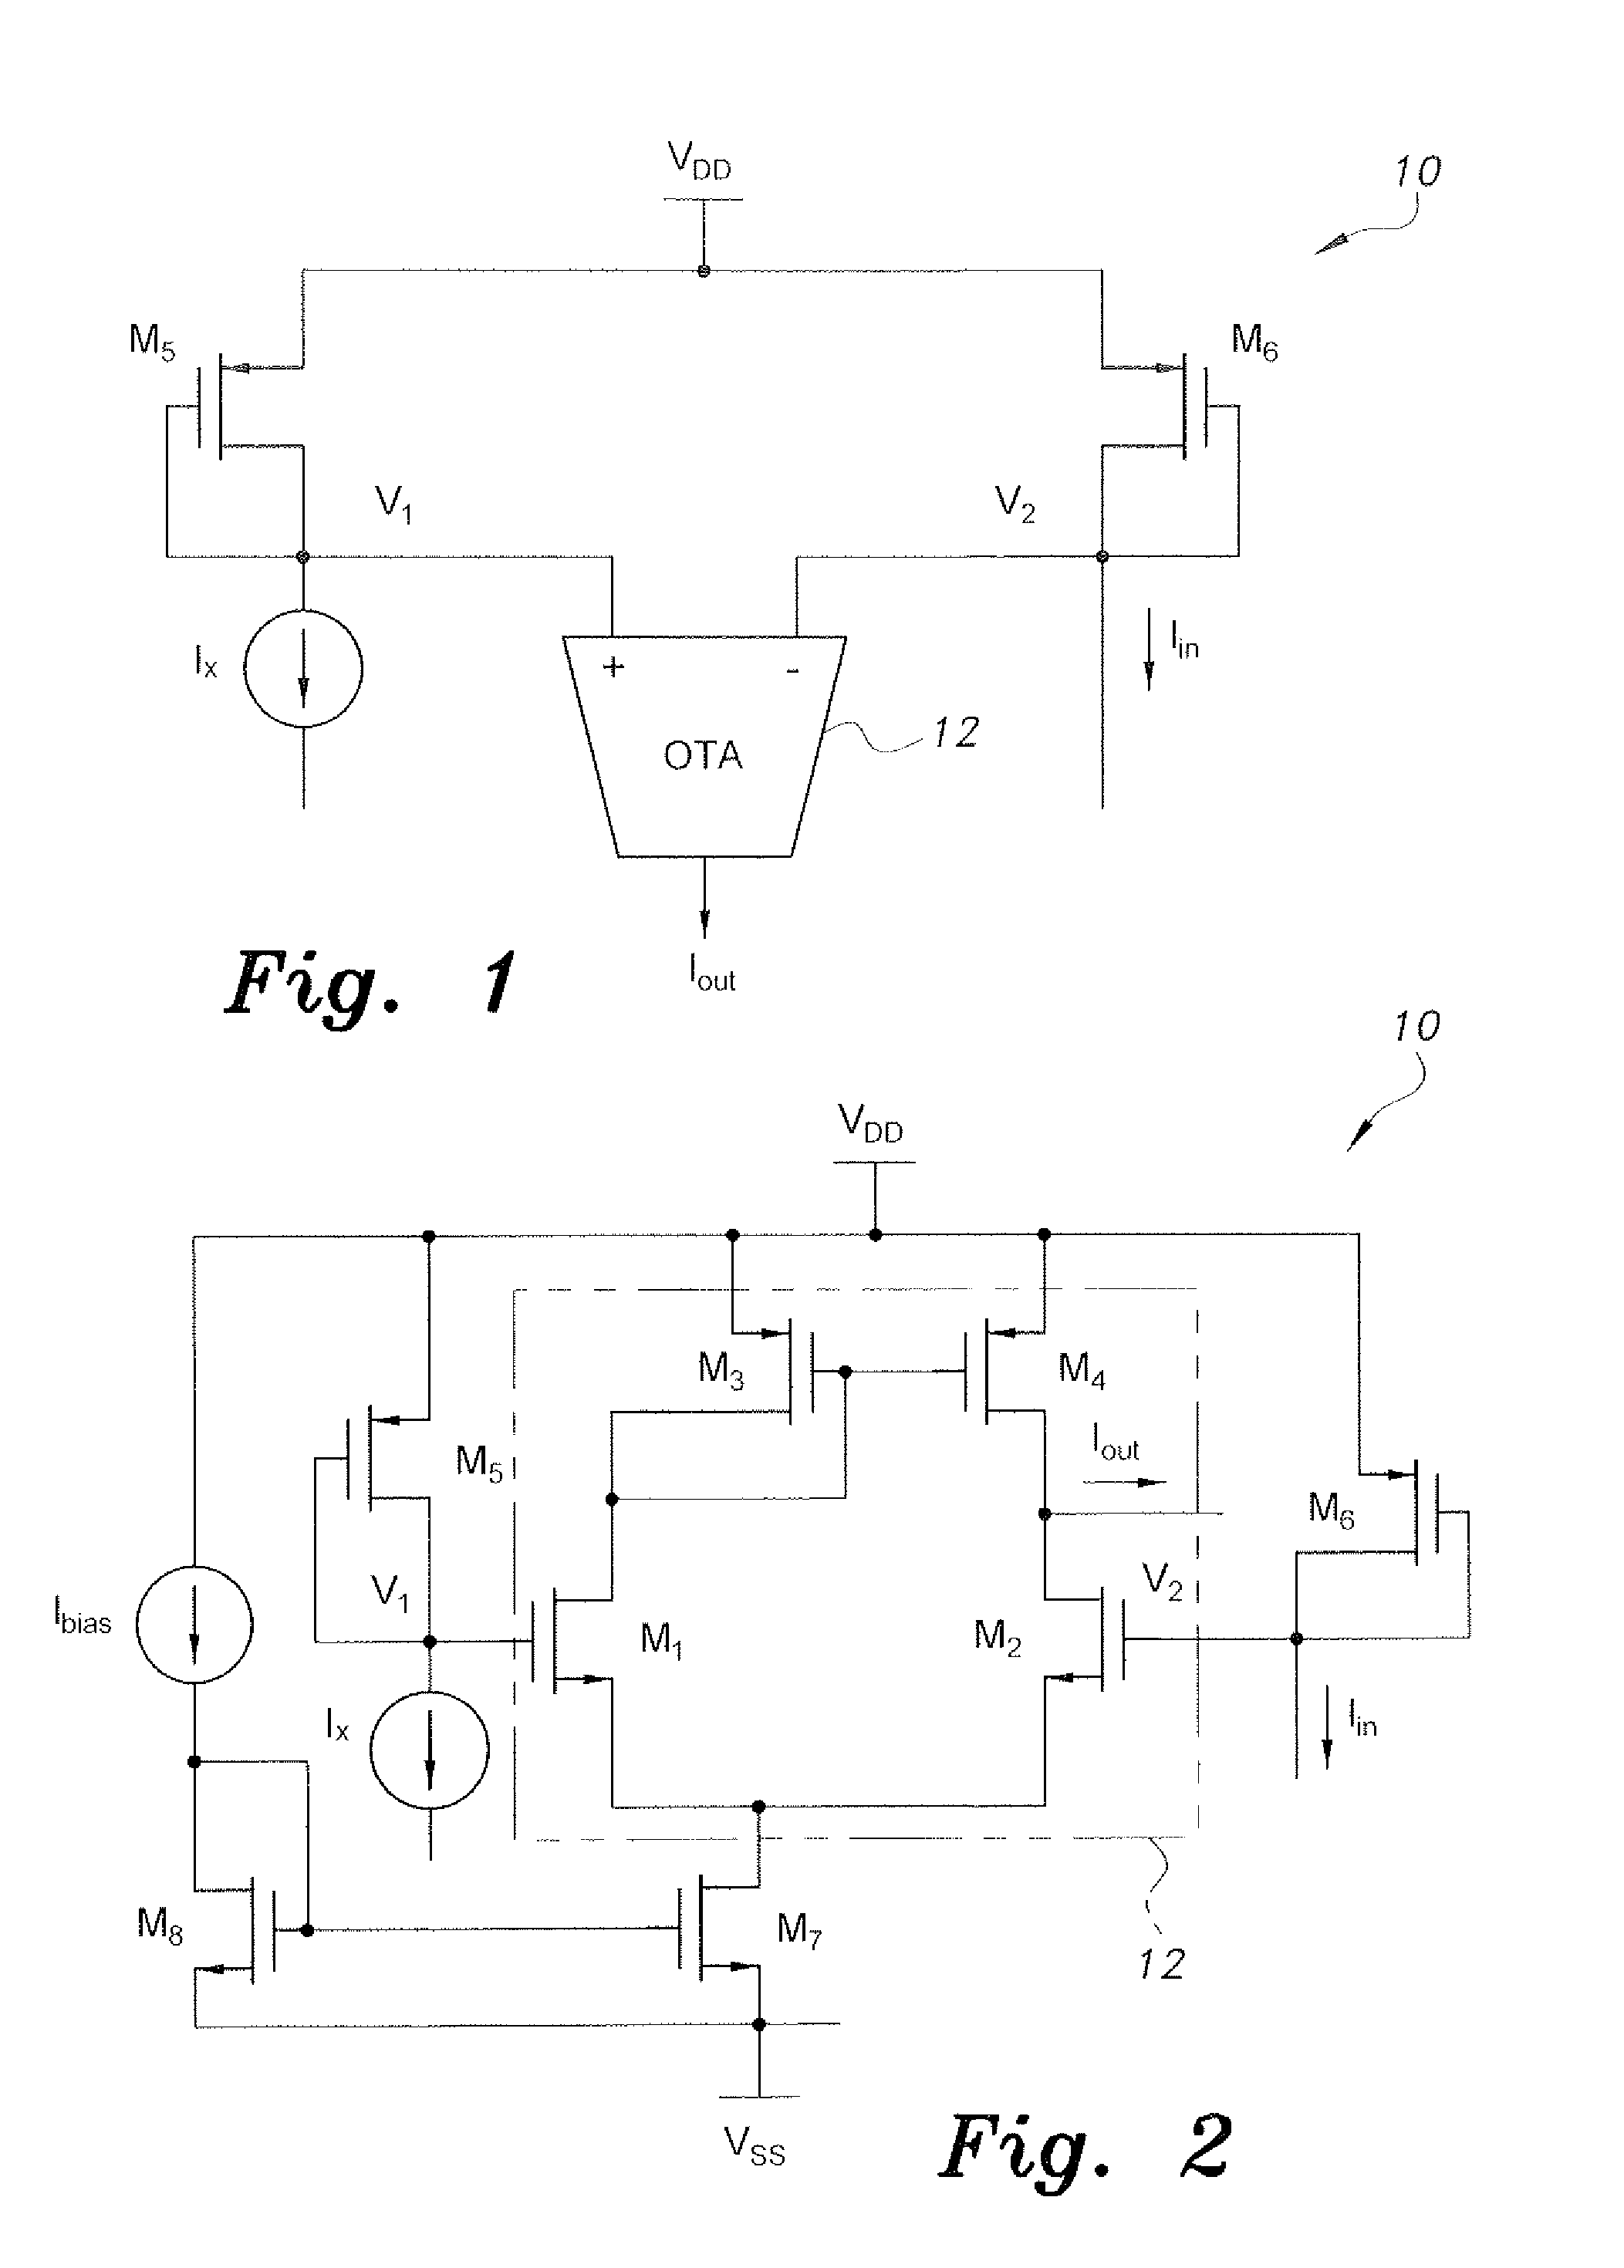 Current-mode CMOS logarithmic function circuit